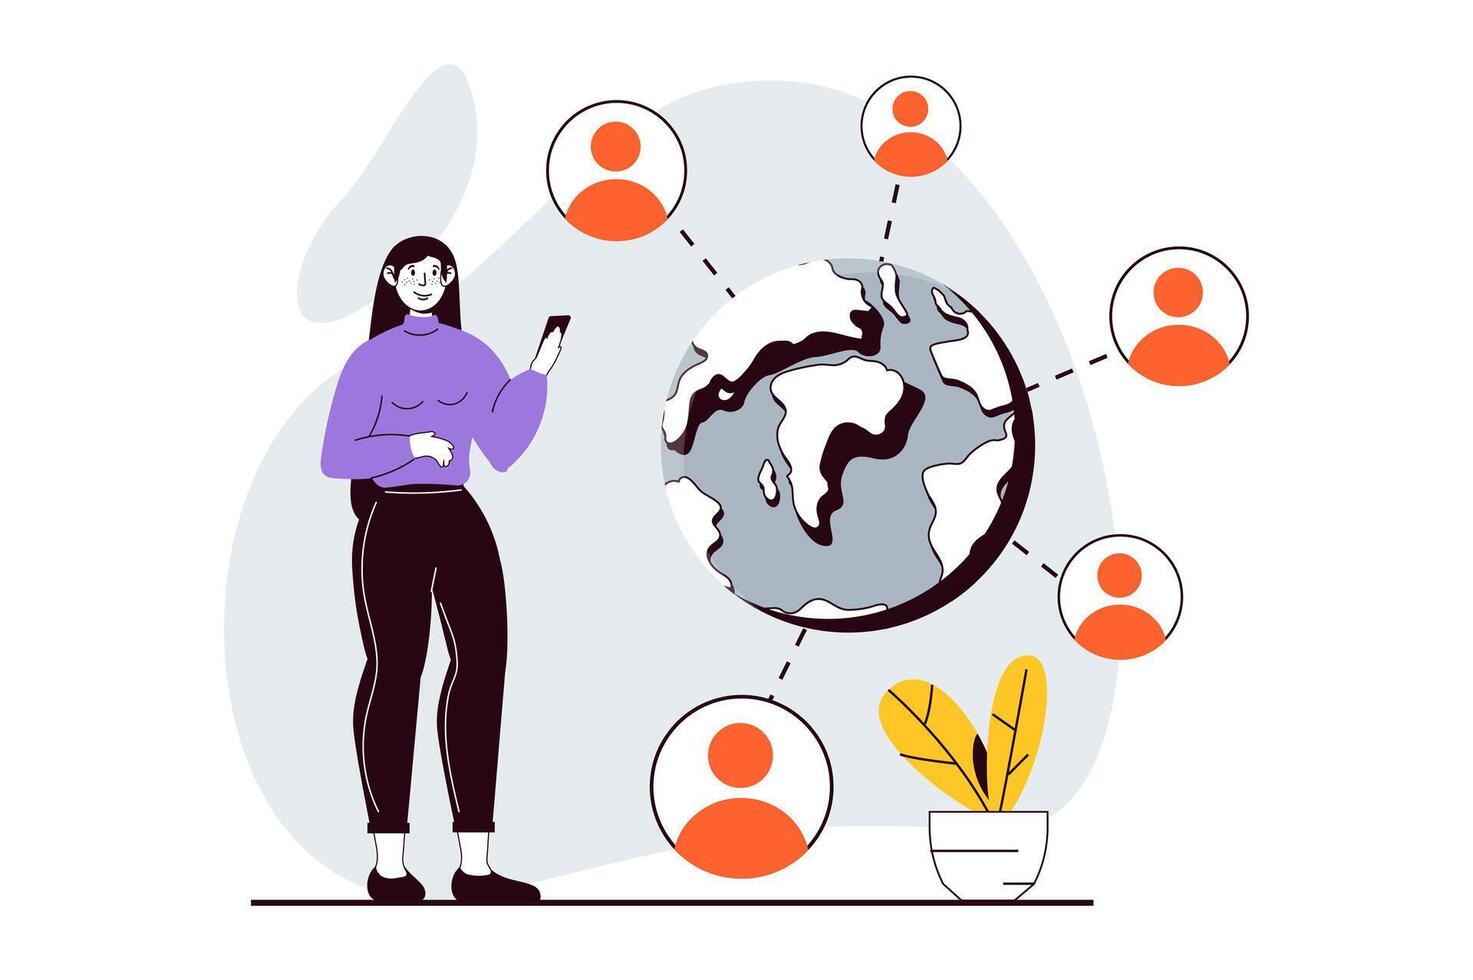 Social network concept with people scene in flat design for web. Woman getting contacts and connecting online with friends in global. Vector illustration for social media banner, marketing material.